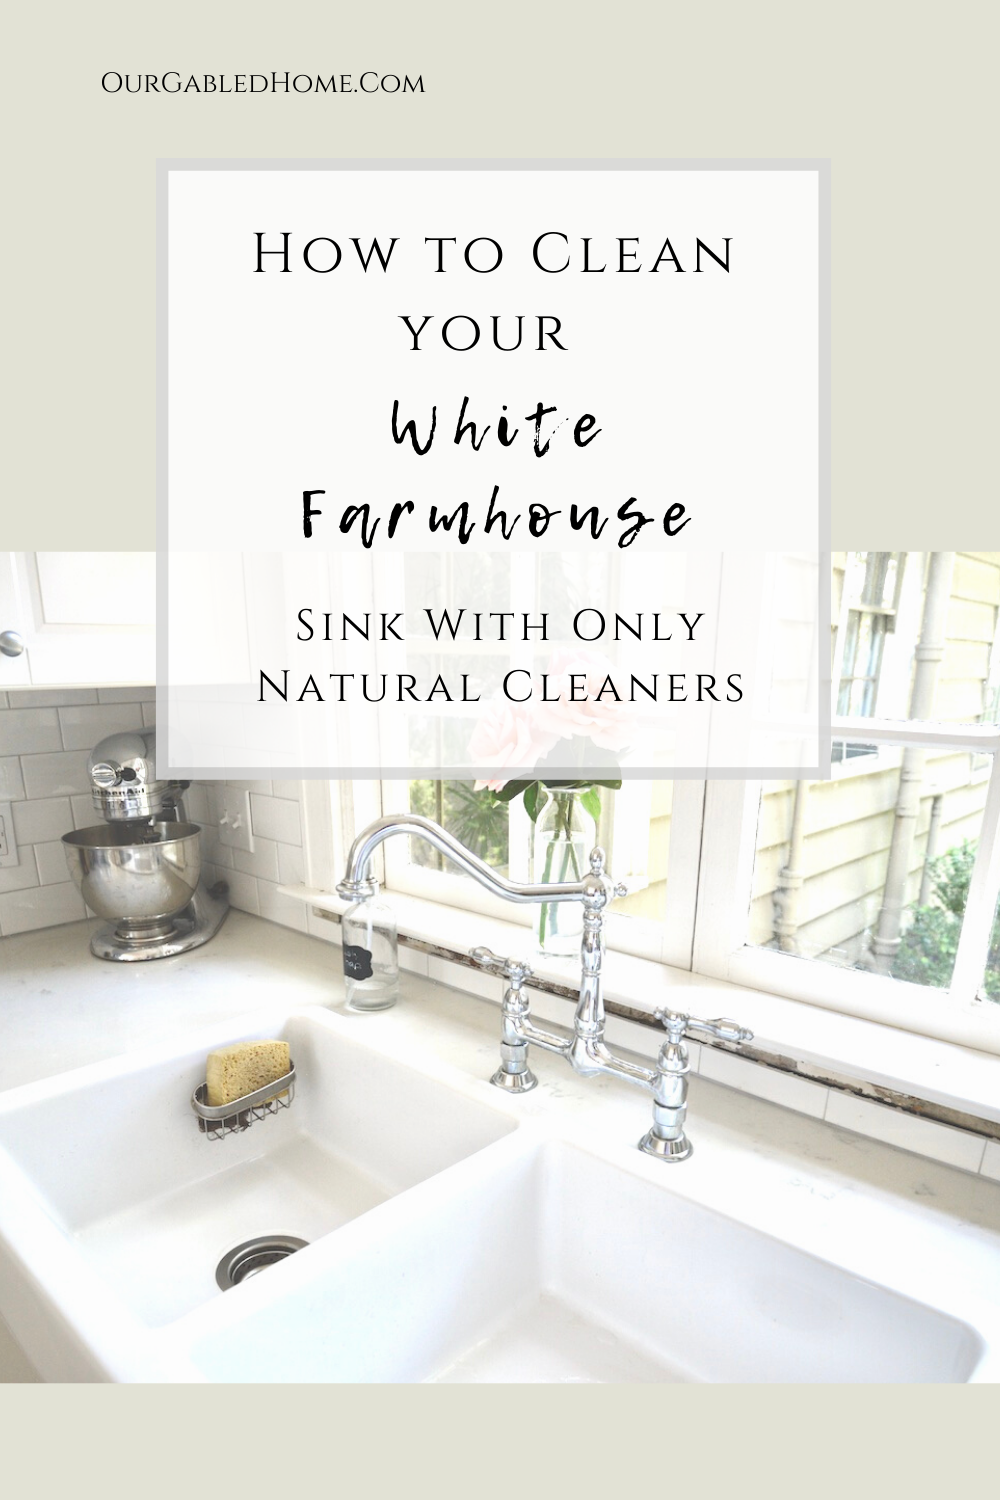 How to clean your white farmhouse sink with only natural cleaners